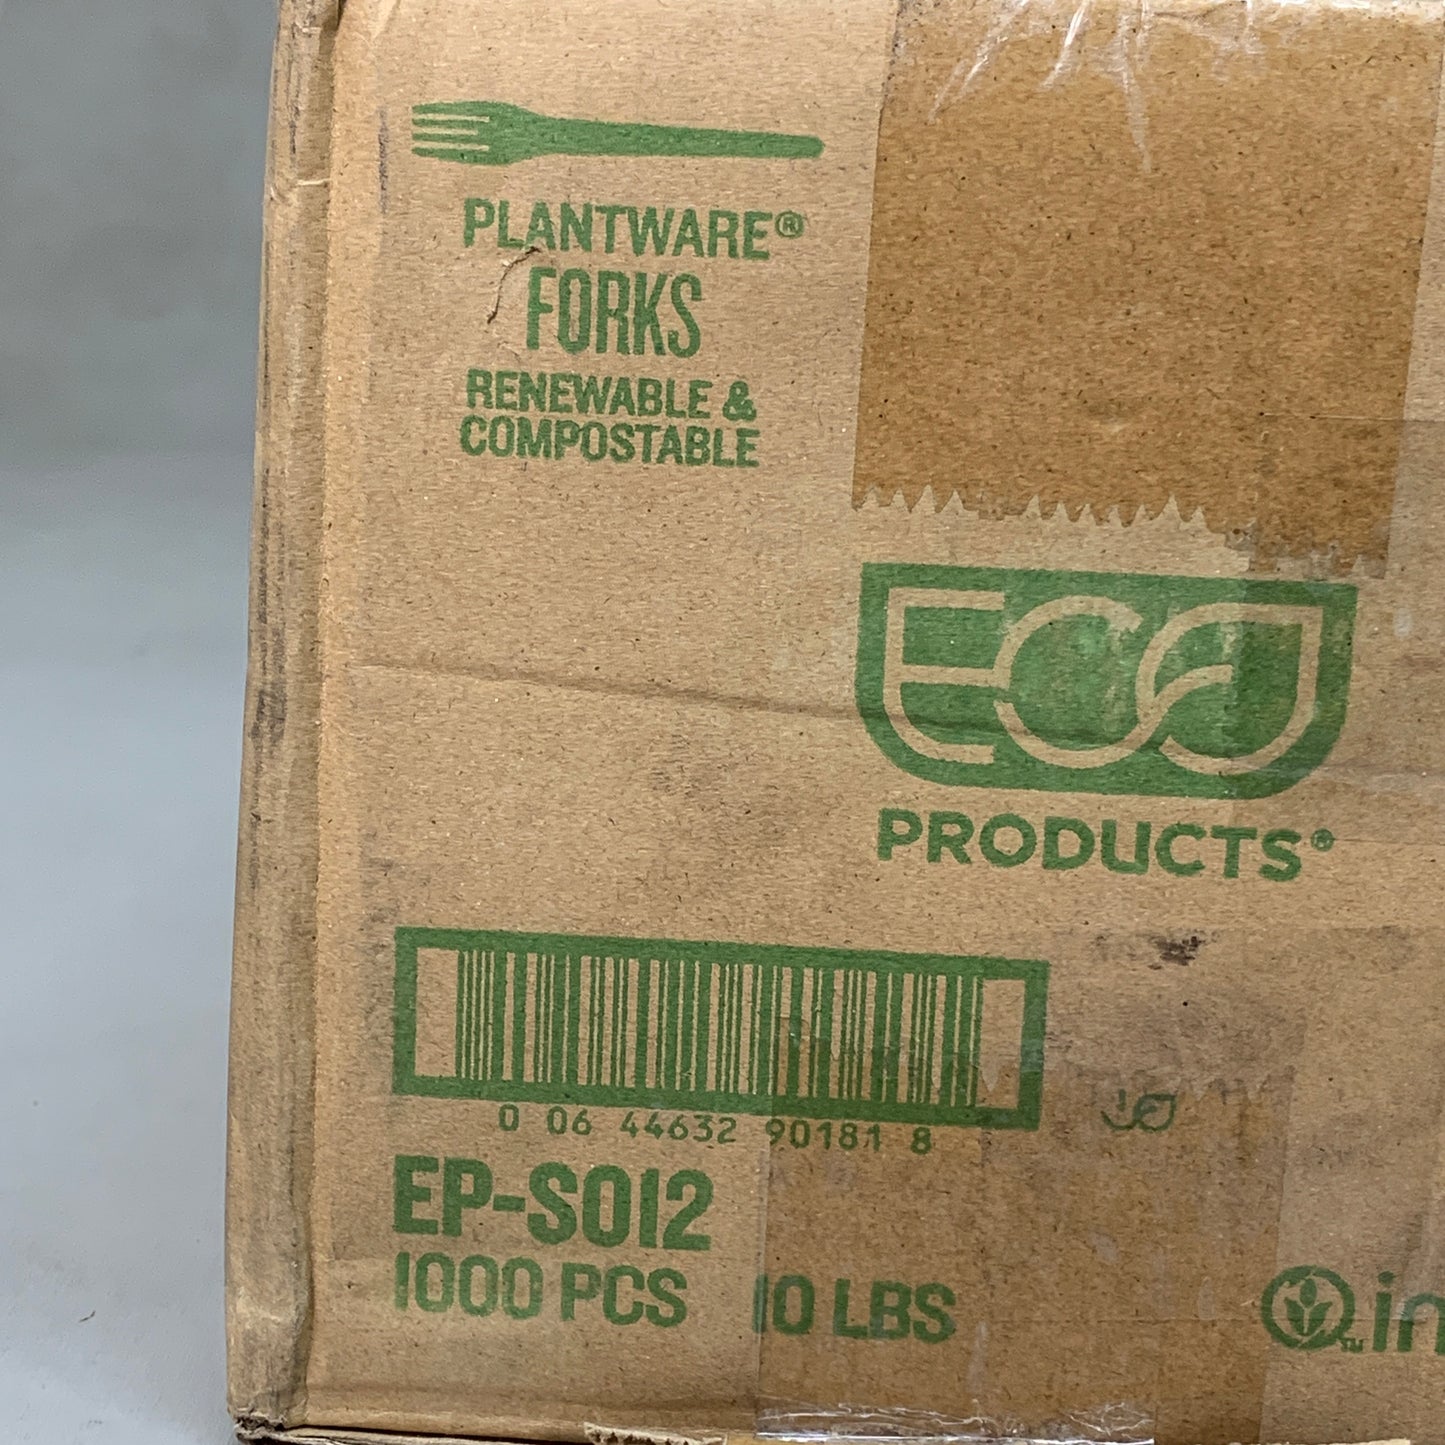 ECO-PRODUCTS 1000 PK! Plantware Renewable & Compostable Fork - 6" (New Other)